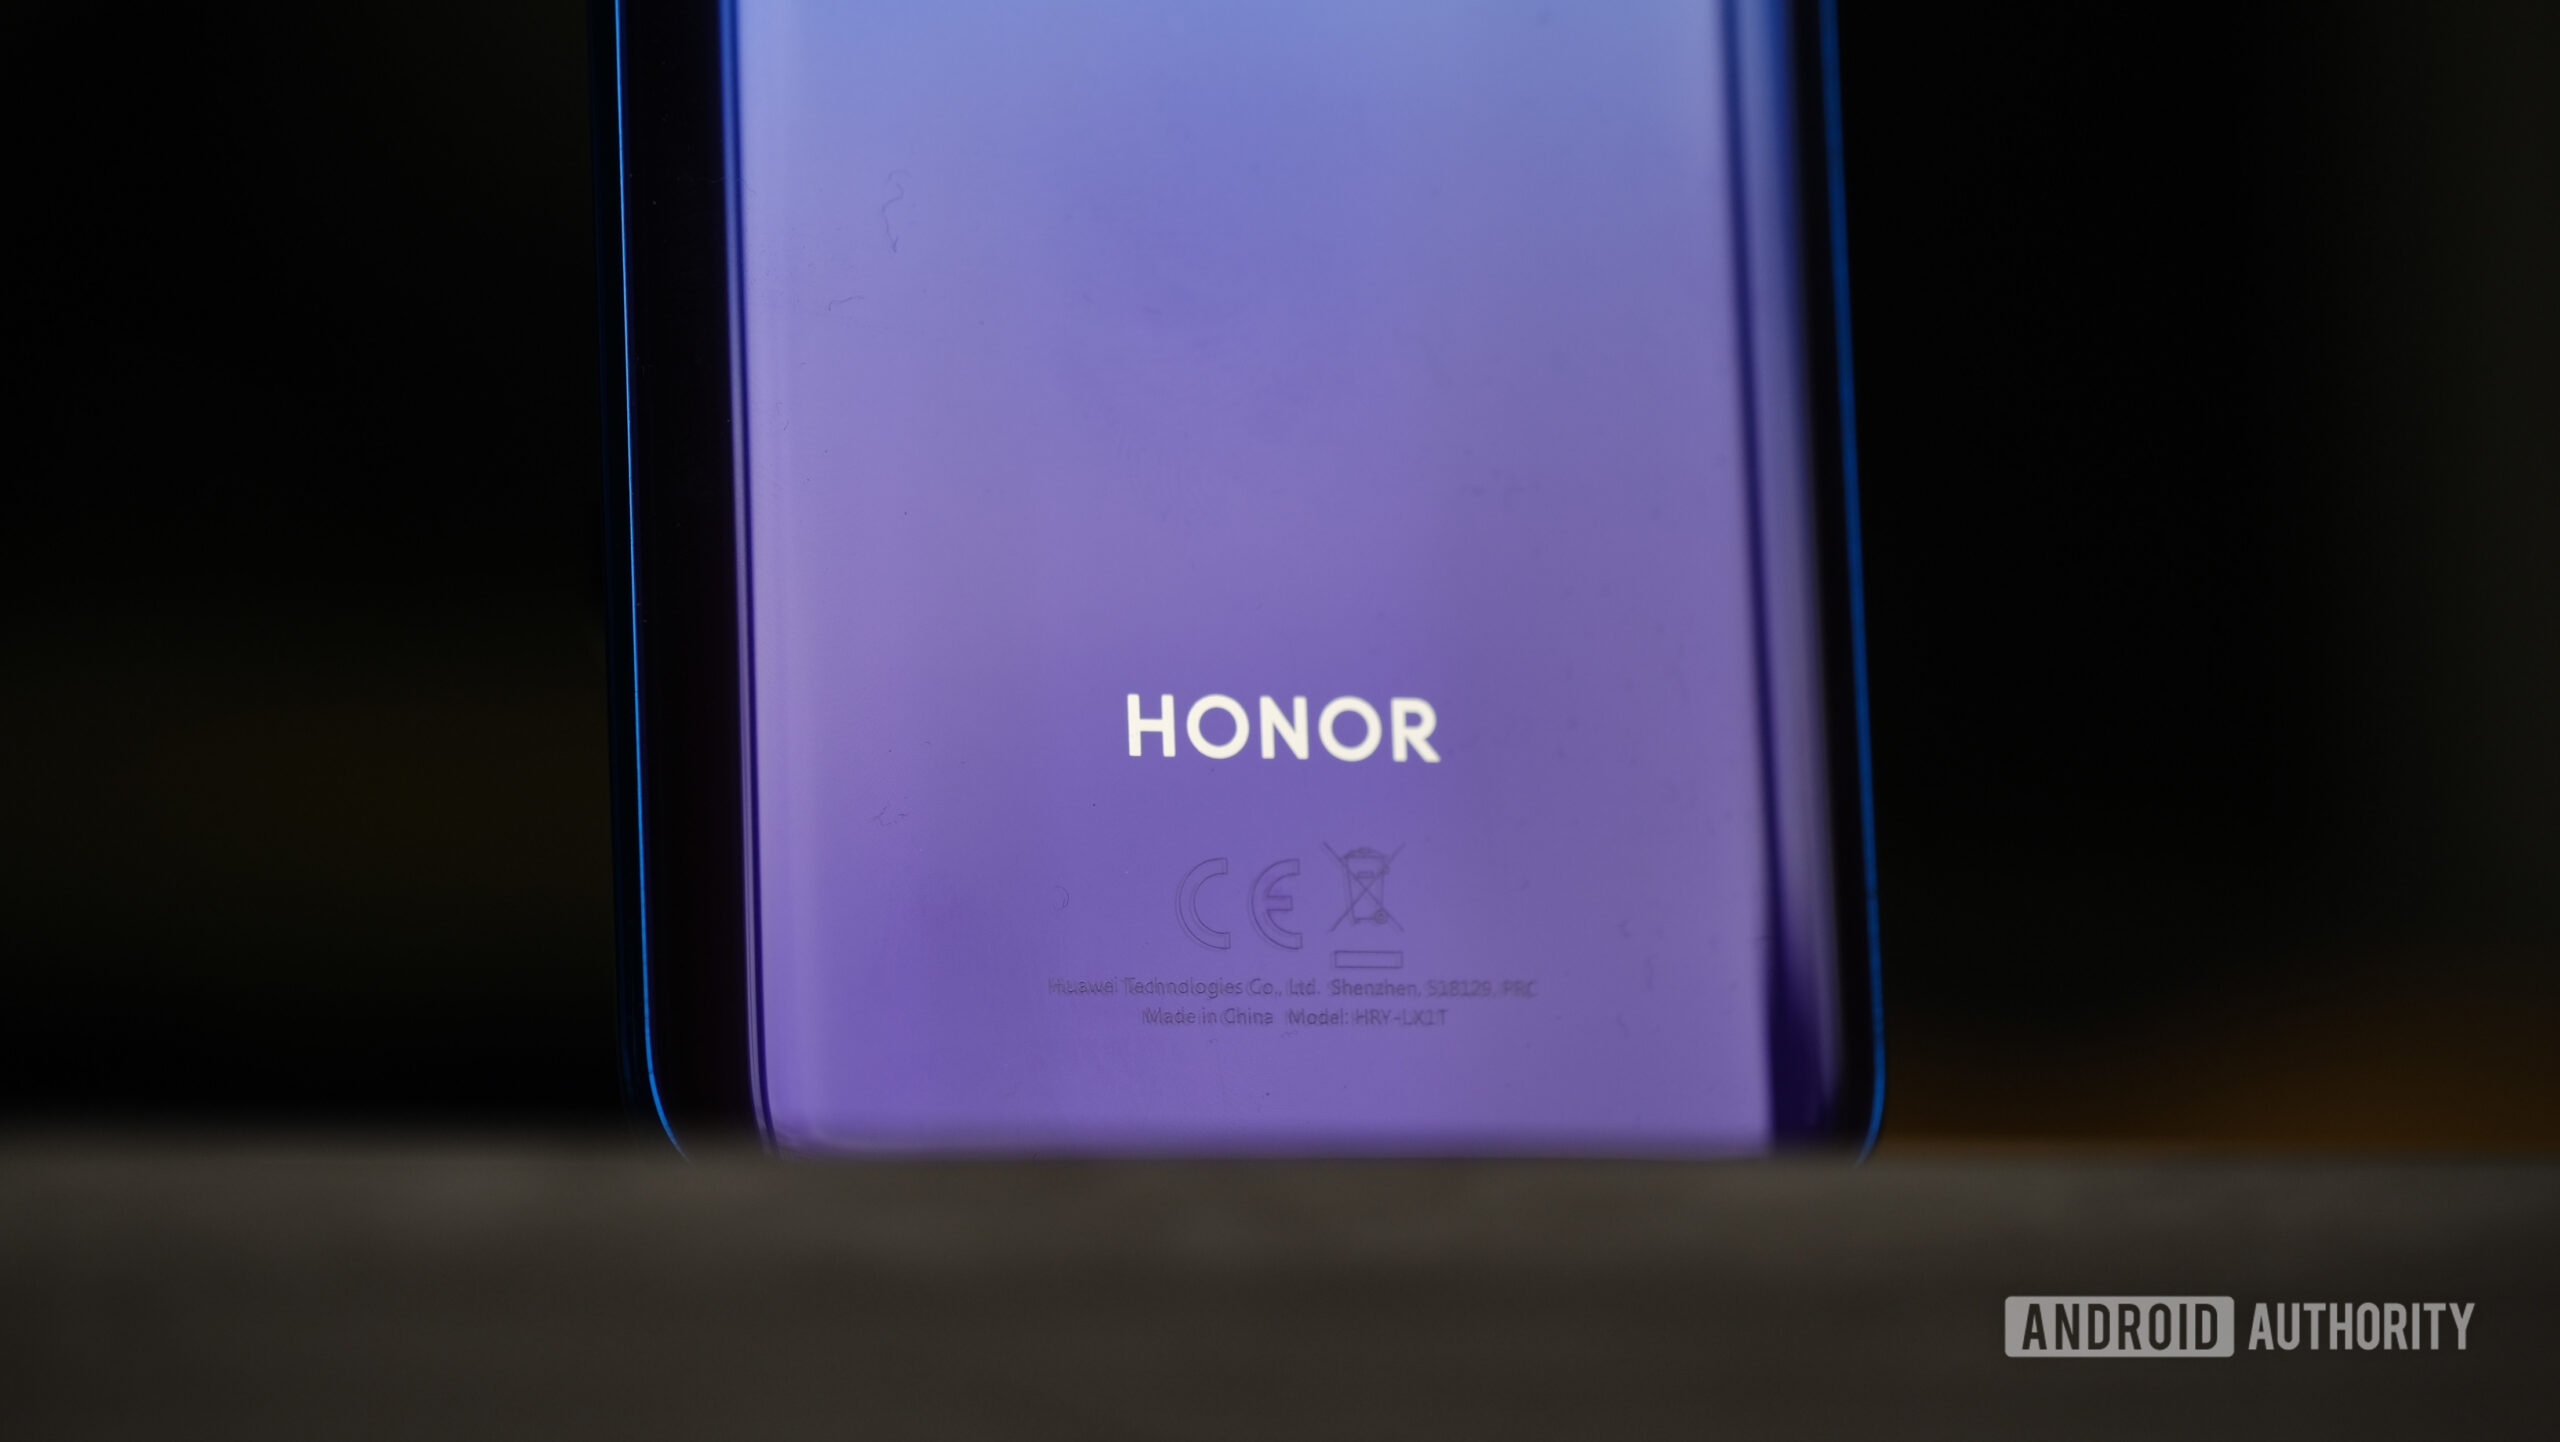 The HONOR 20 Lite is part of the HONOR 20 series.